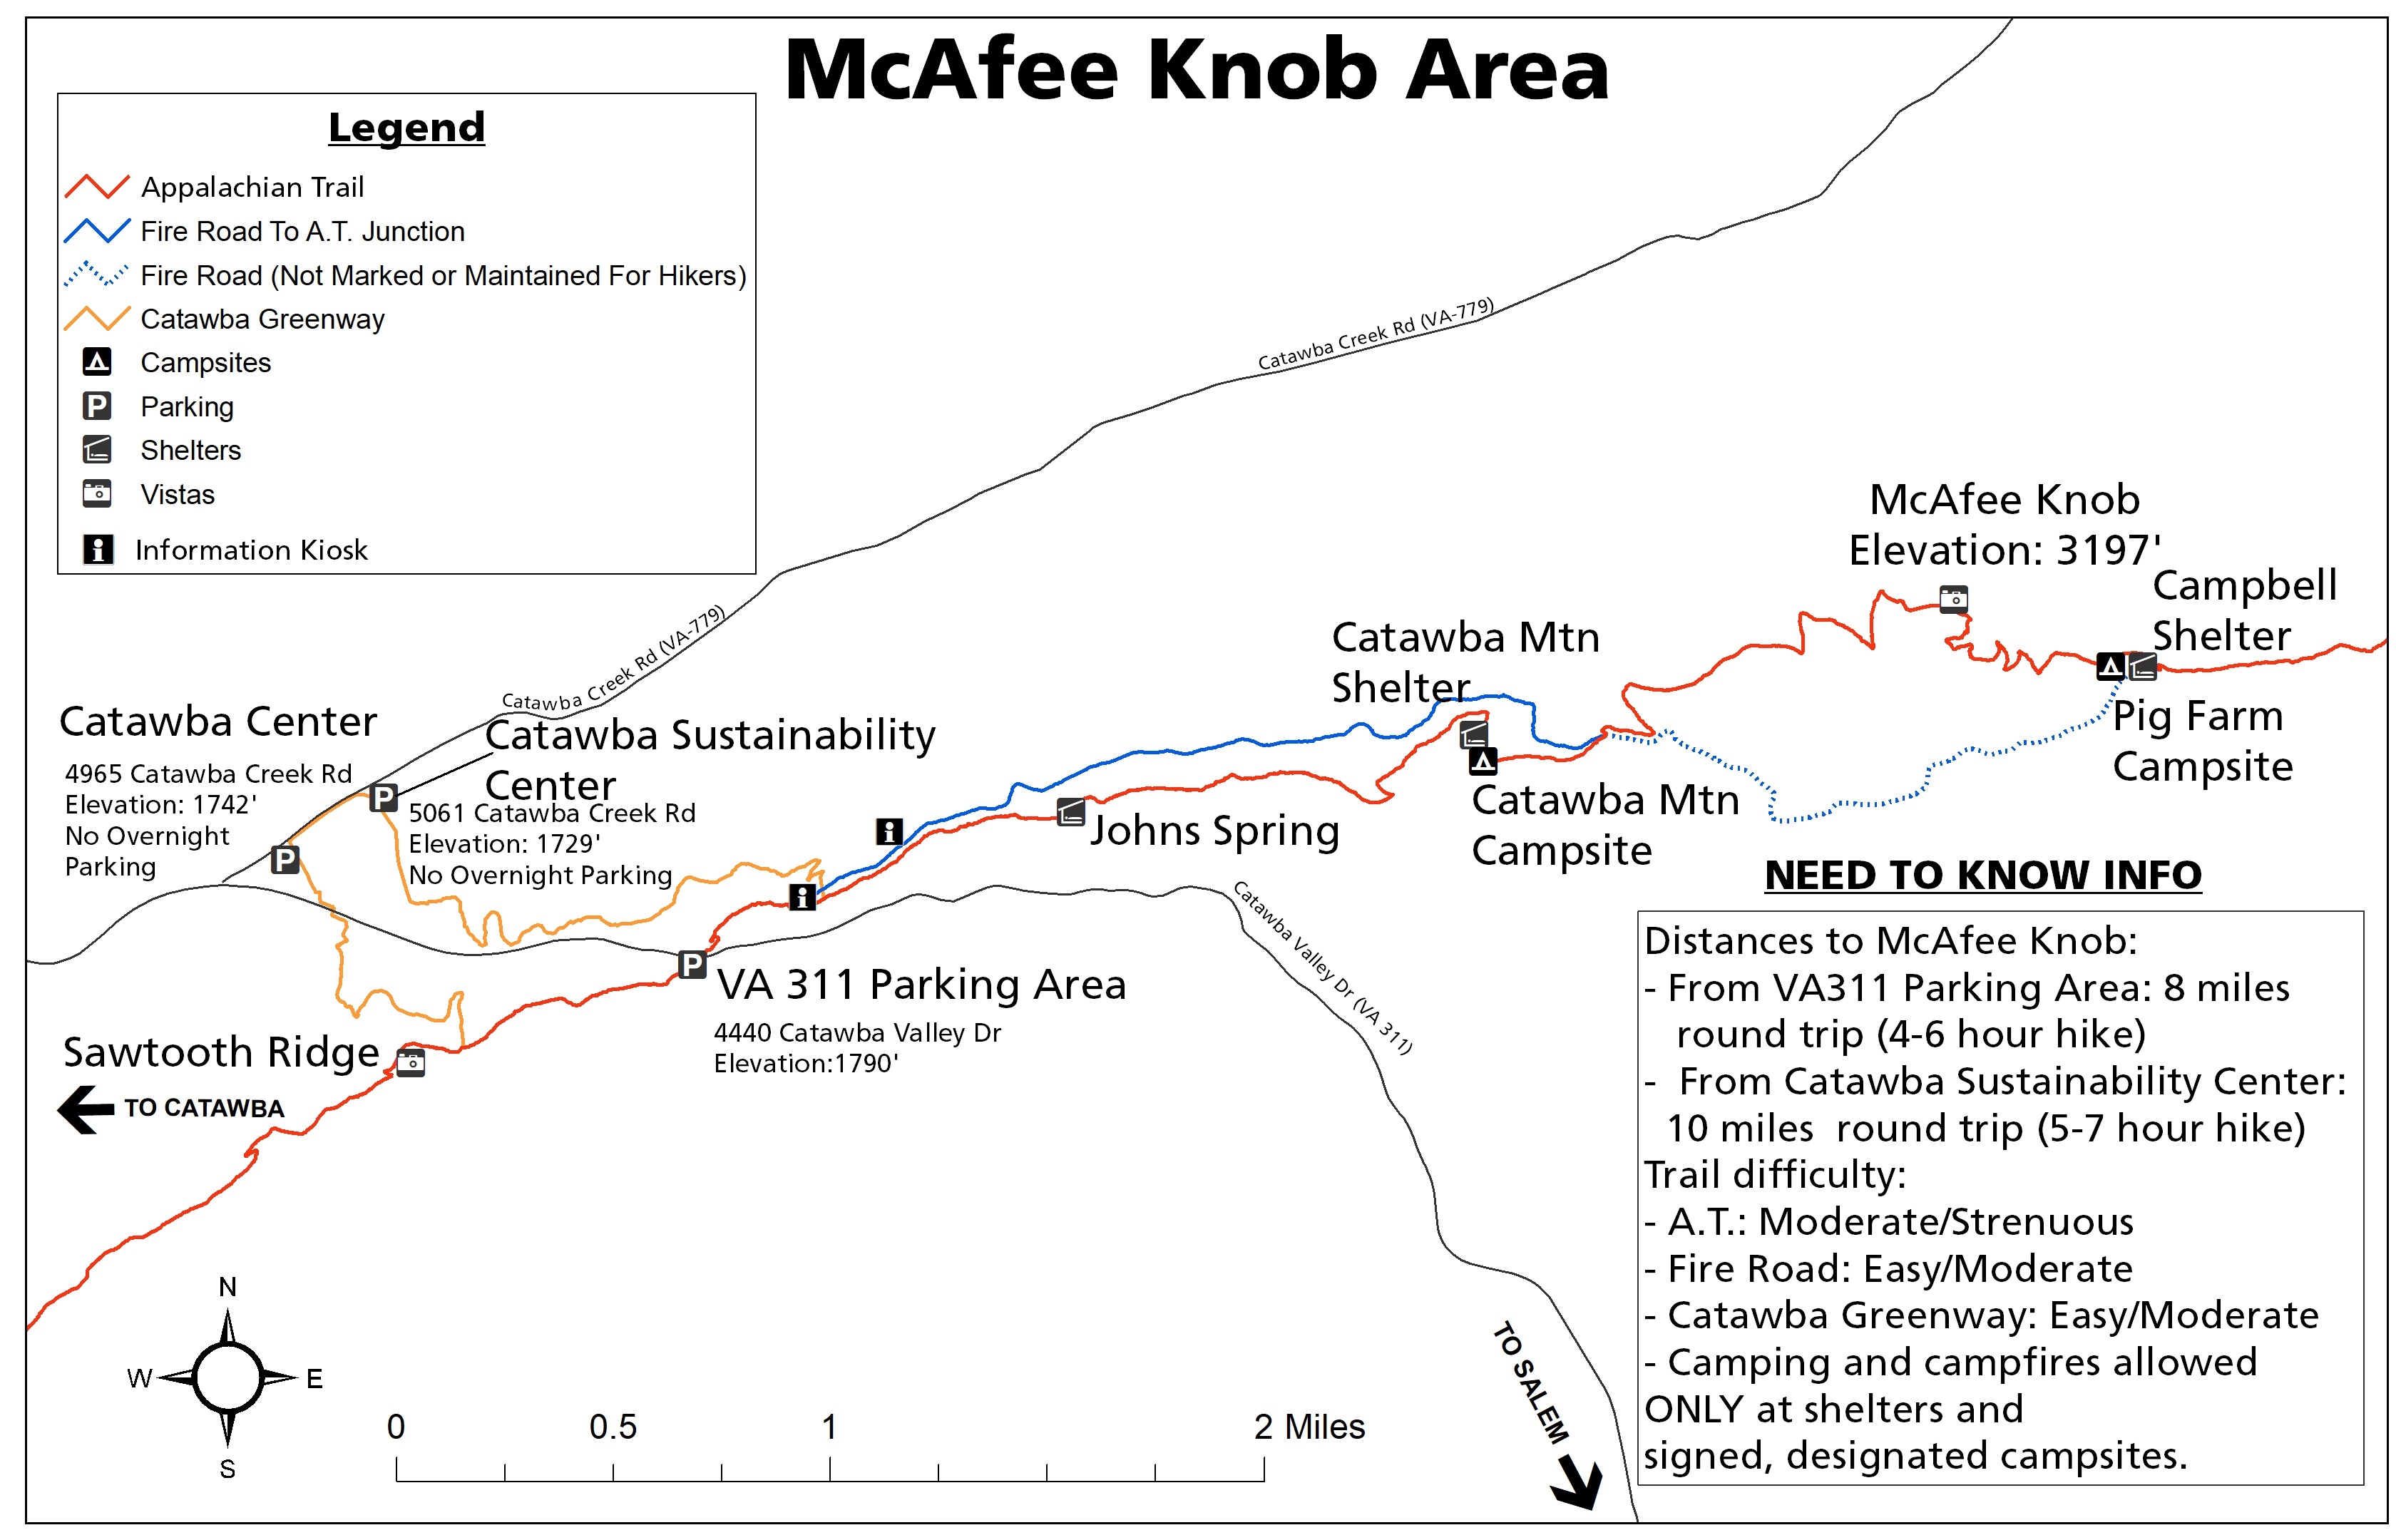 A map of the McAfee Knob area, suitable for dayhiking purposes